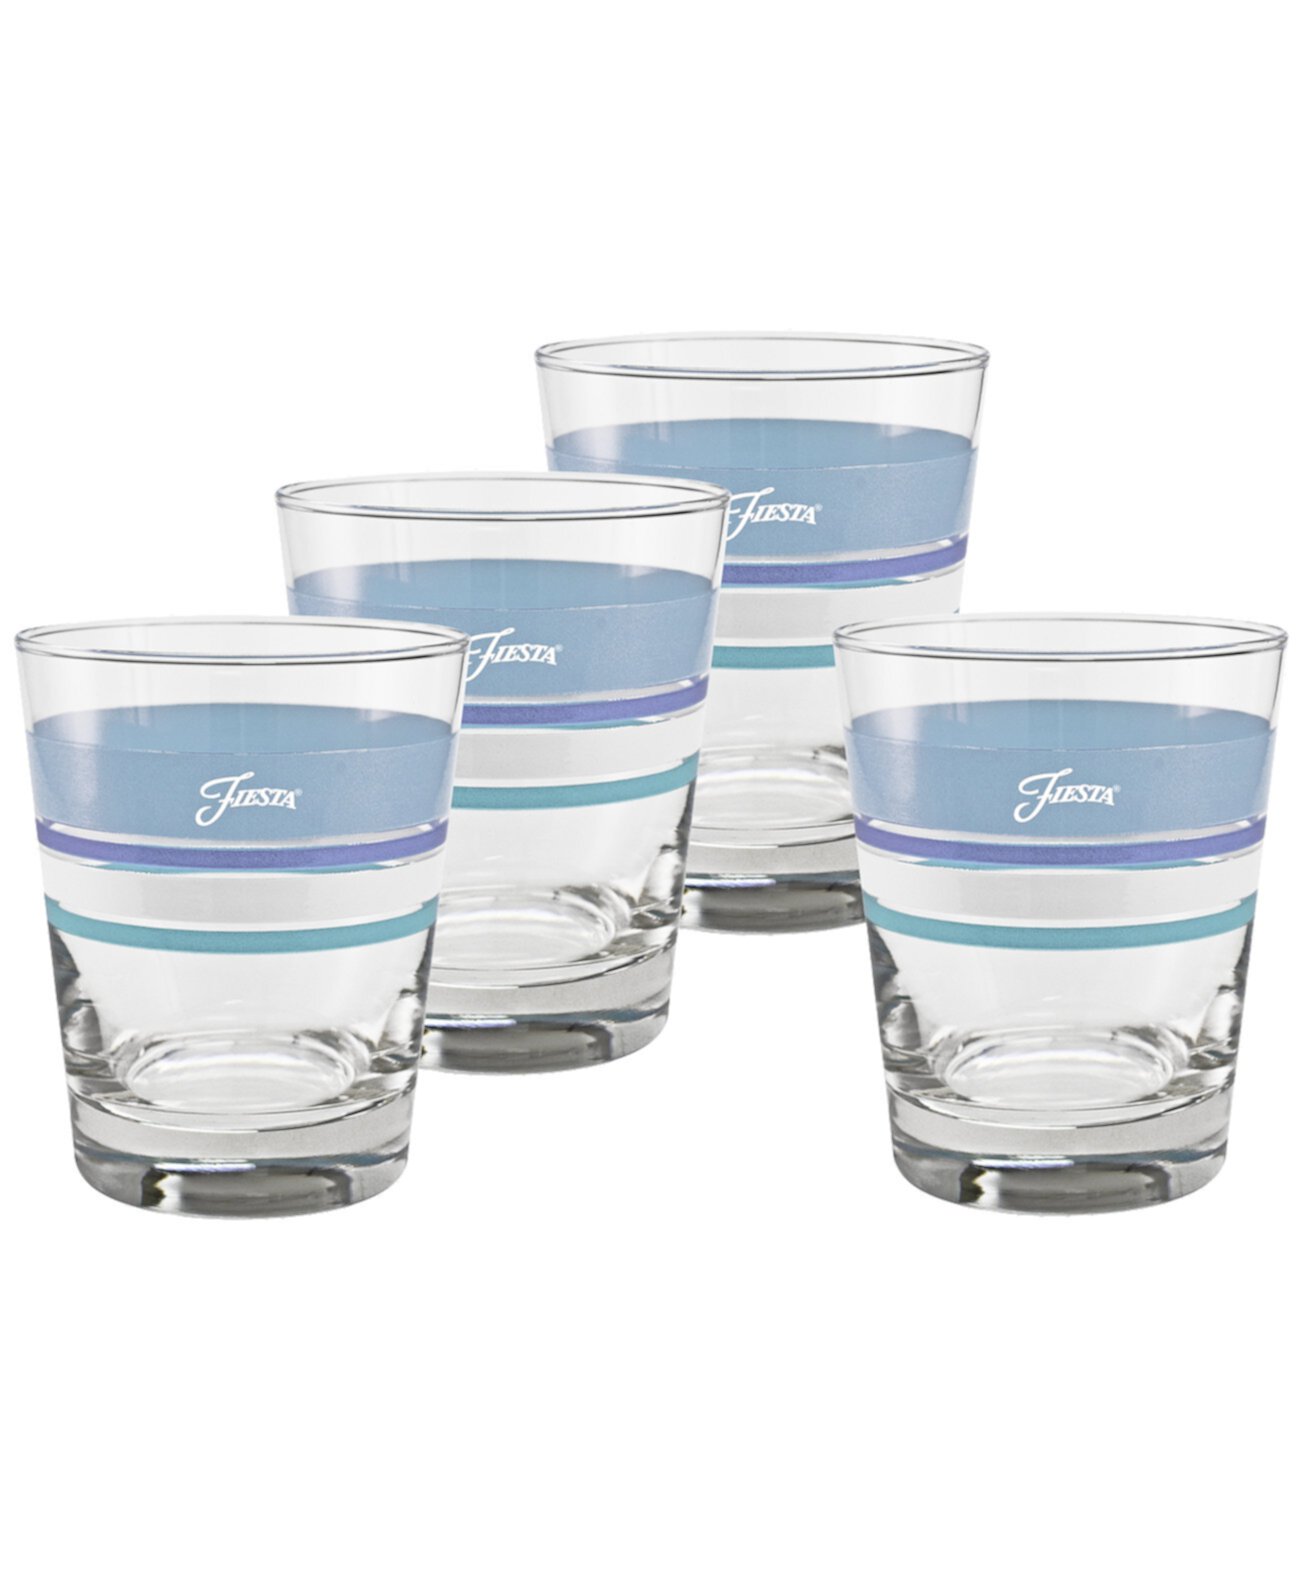 Coastal Blues Edgeline 15-Ounce Tapered DOF Double Old Fashioned Glass Set of 4 FIESTA